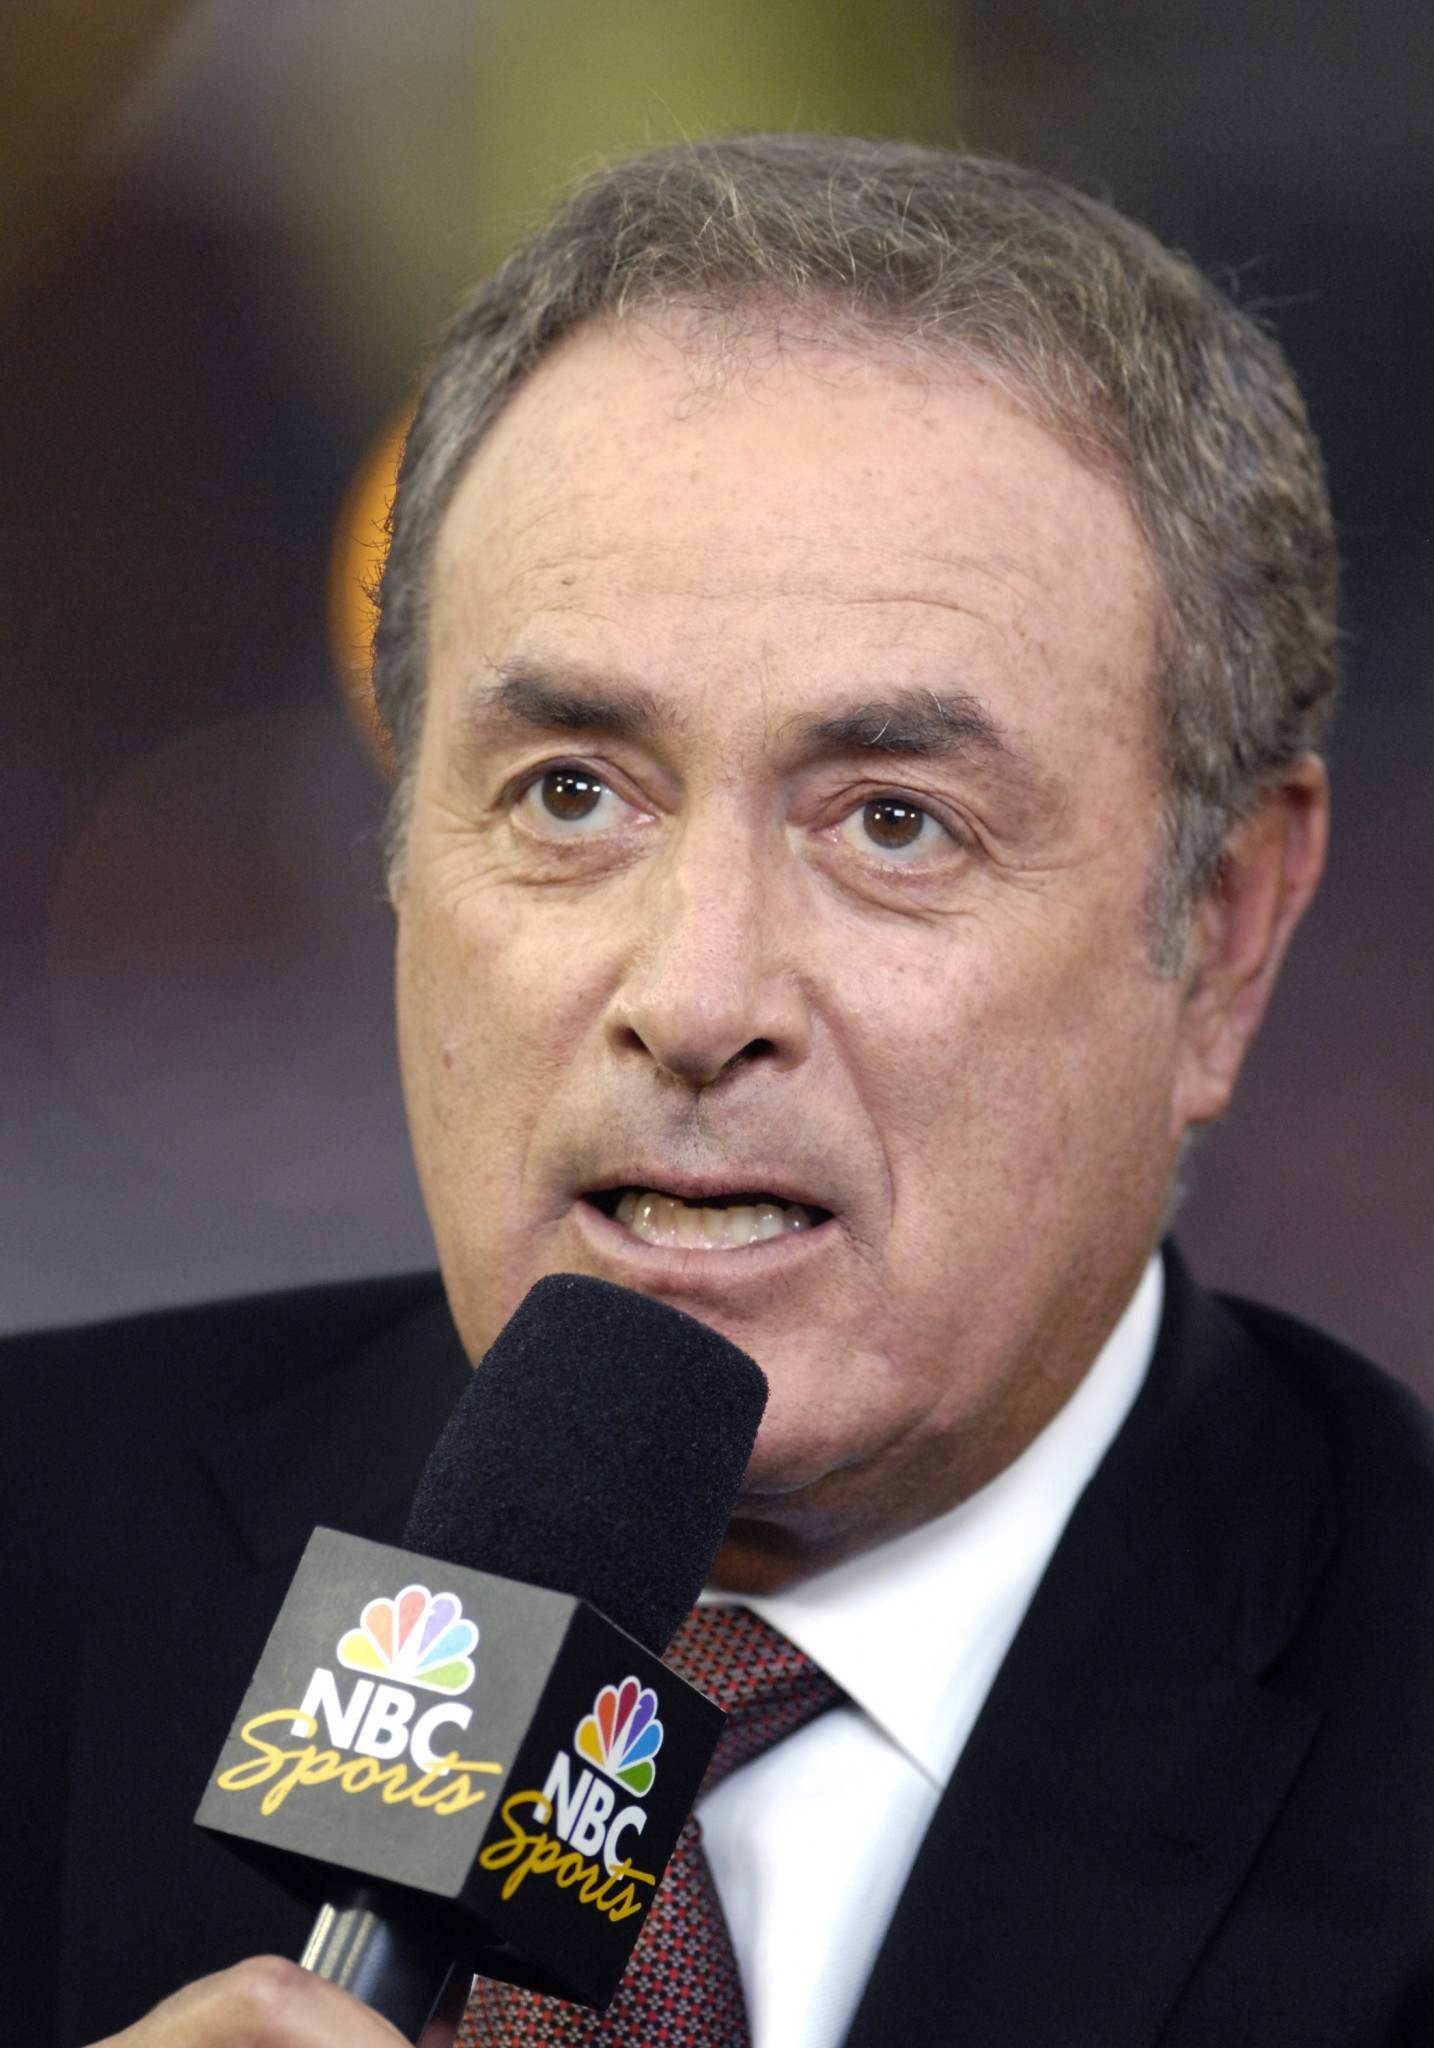 Al Michaels' commentary on the US ice hockey victory over the Soviet Union at the 1980 Olympics is now legend: “11 seconds, you've got 10 seconds, the countdown going on right now! Morrow, up to Silk. Five seconds left in the game. Do you believe in miracles? Yes!” ©Getty Images